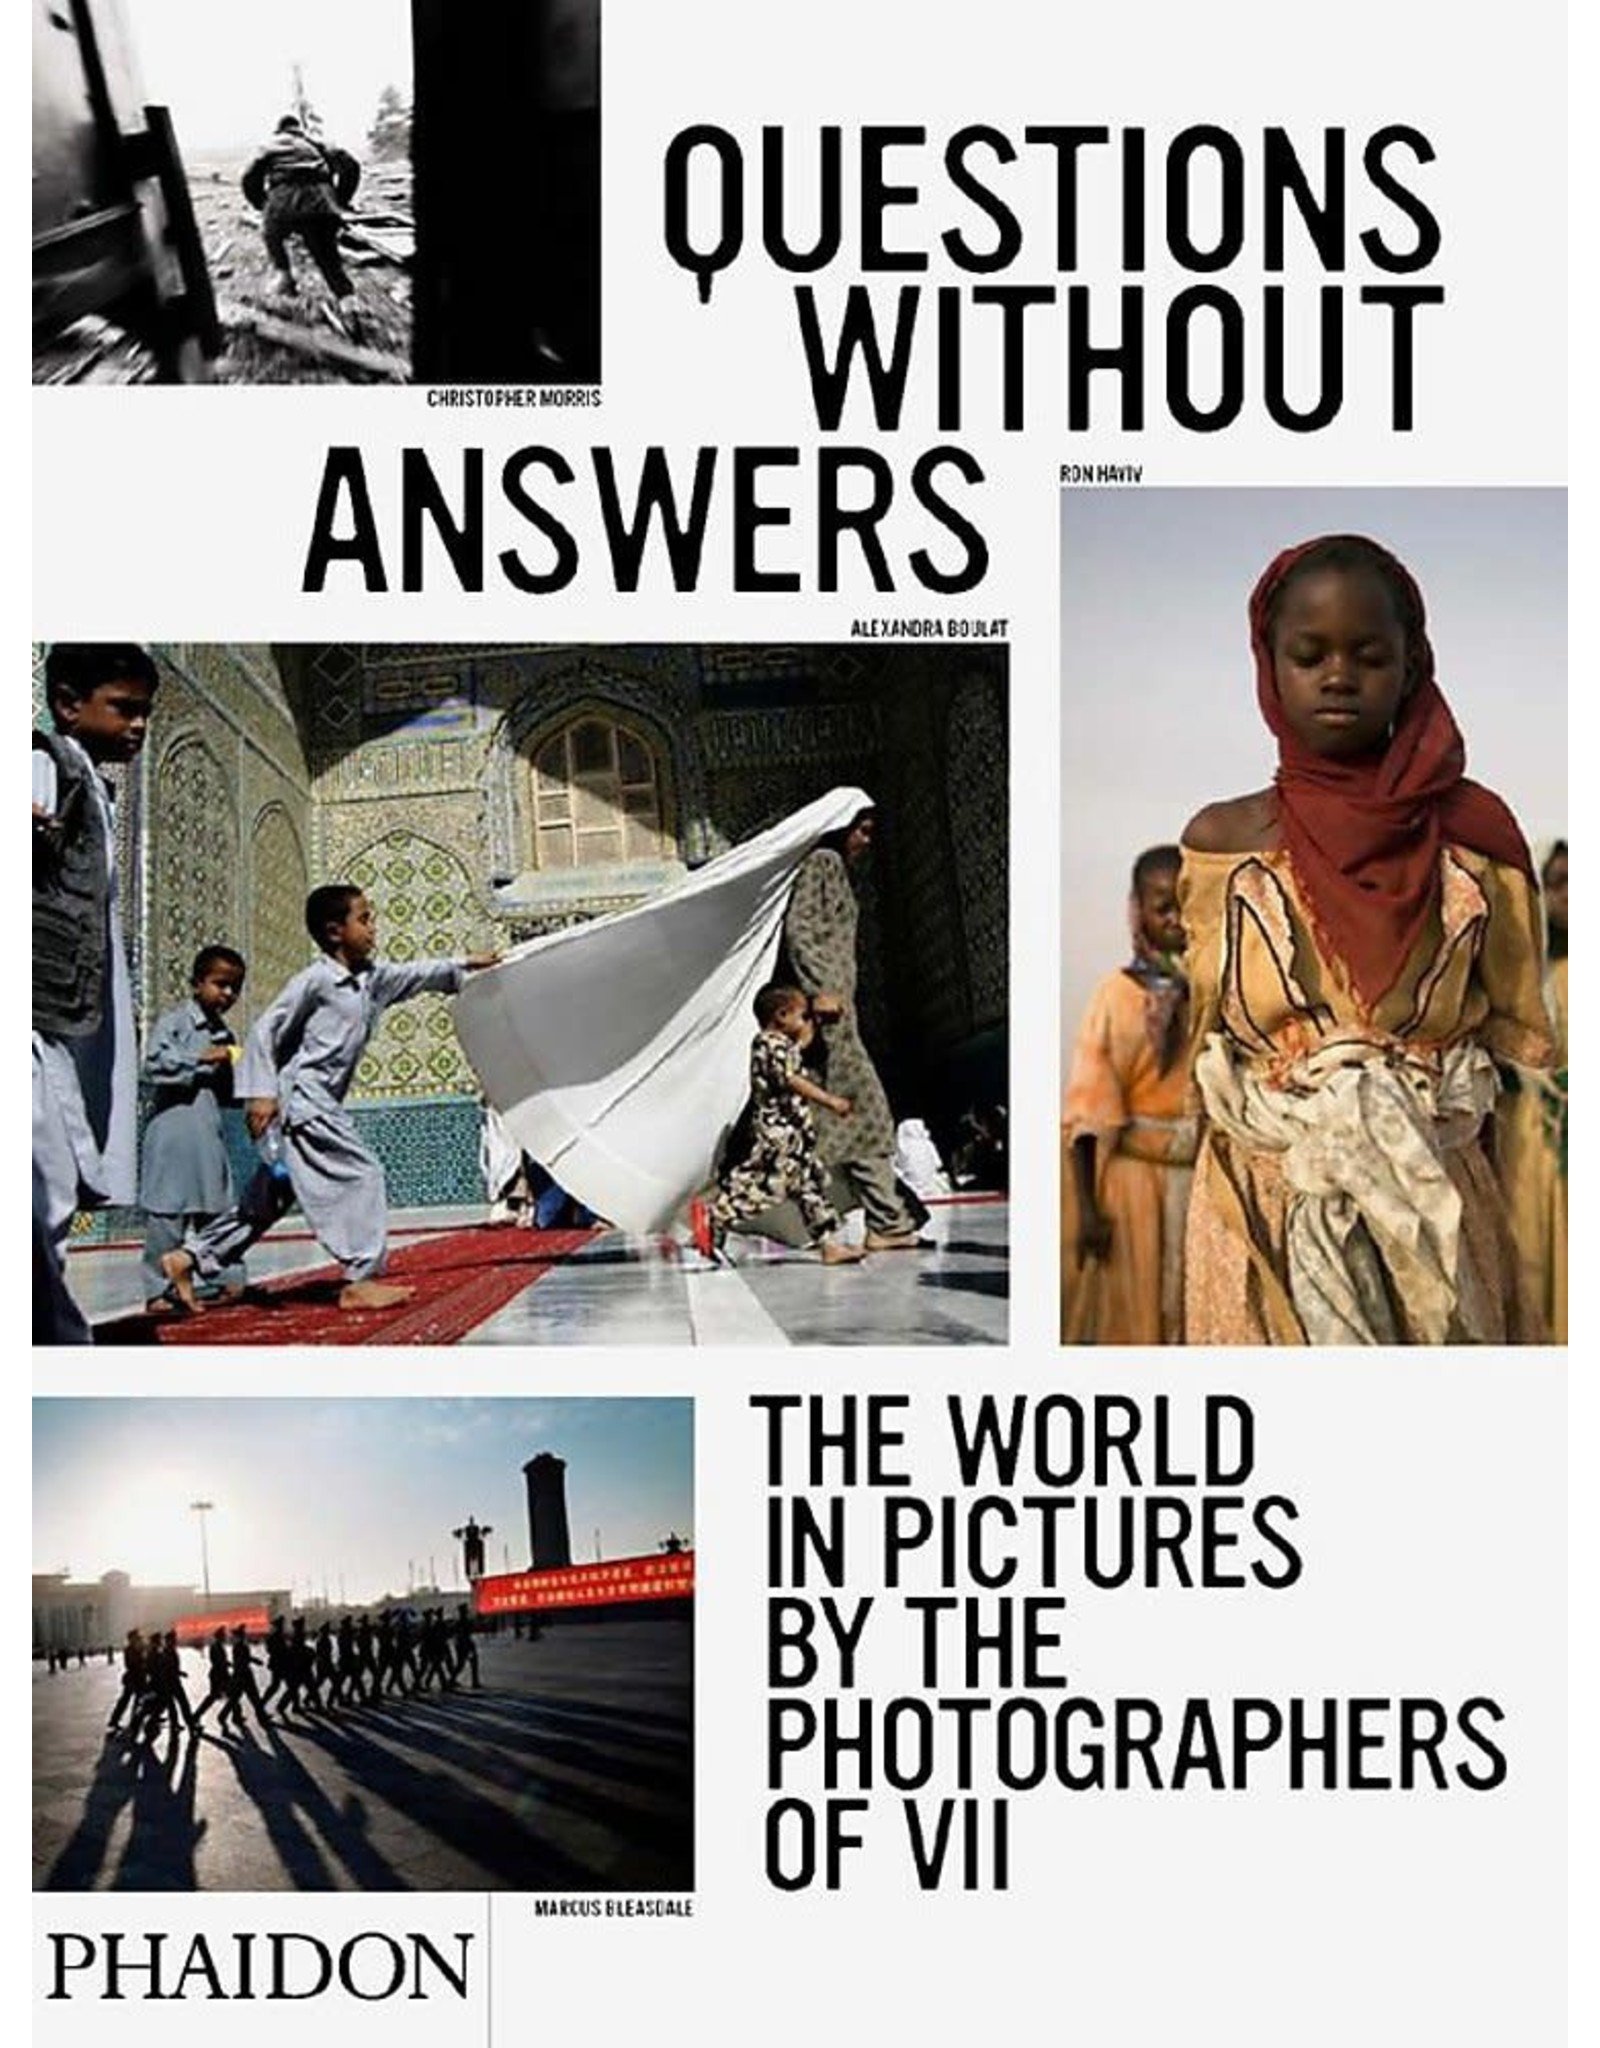 Questions Without Answers - The World in Pictures by the Photographers of VII